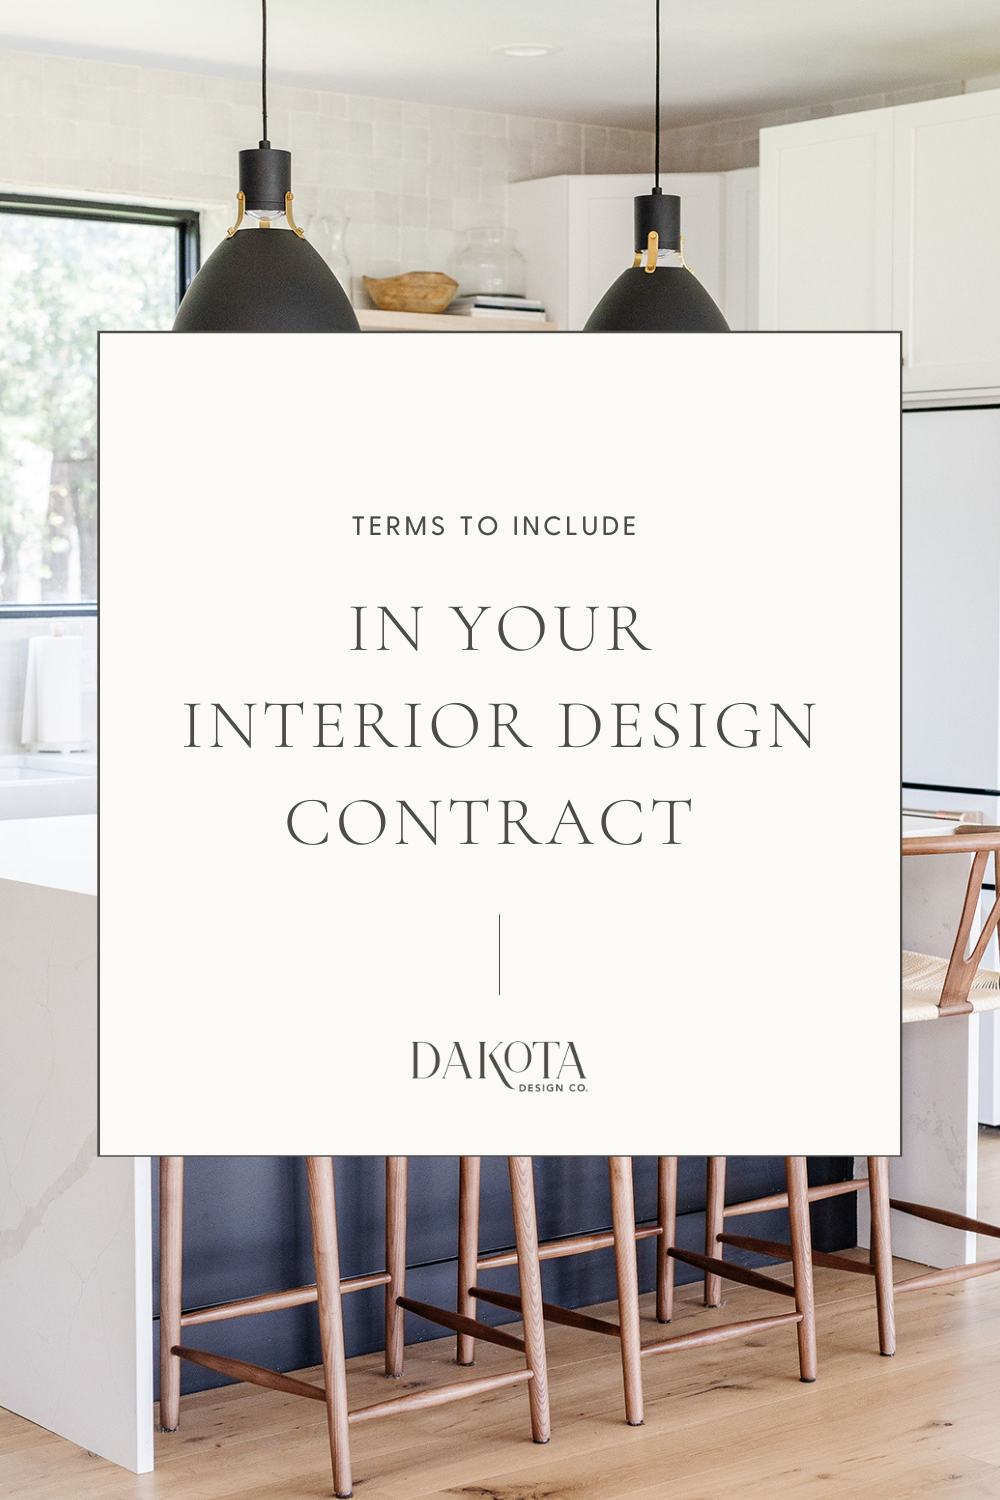 Interior design contract terms and conditions HOW TO CREATE A LUXURY CLIENT EXPERIENCE FOR YOUR DESIGN BUSINESS Dakota Design Company Operations Consulting for Interior Designers